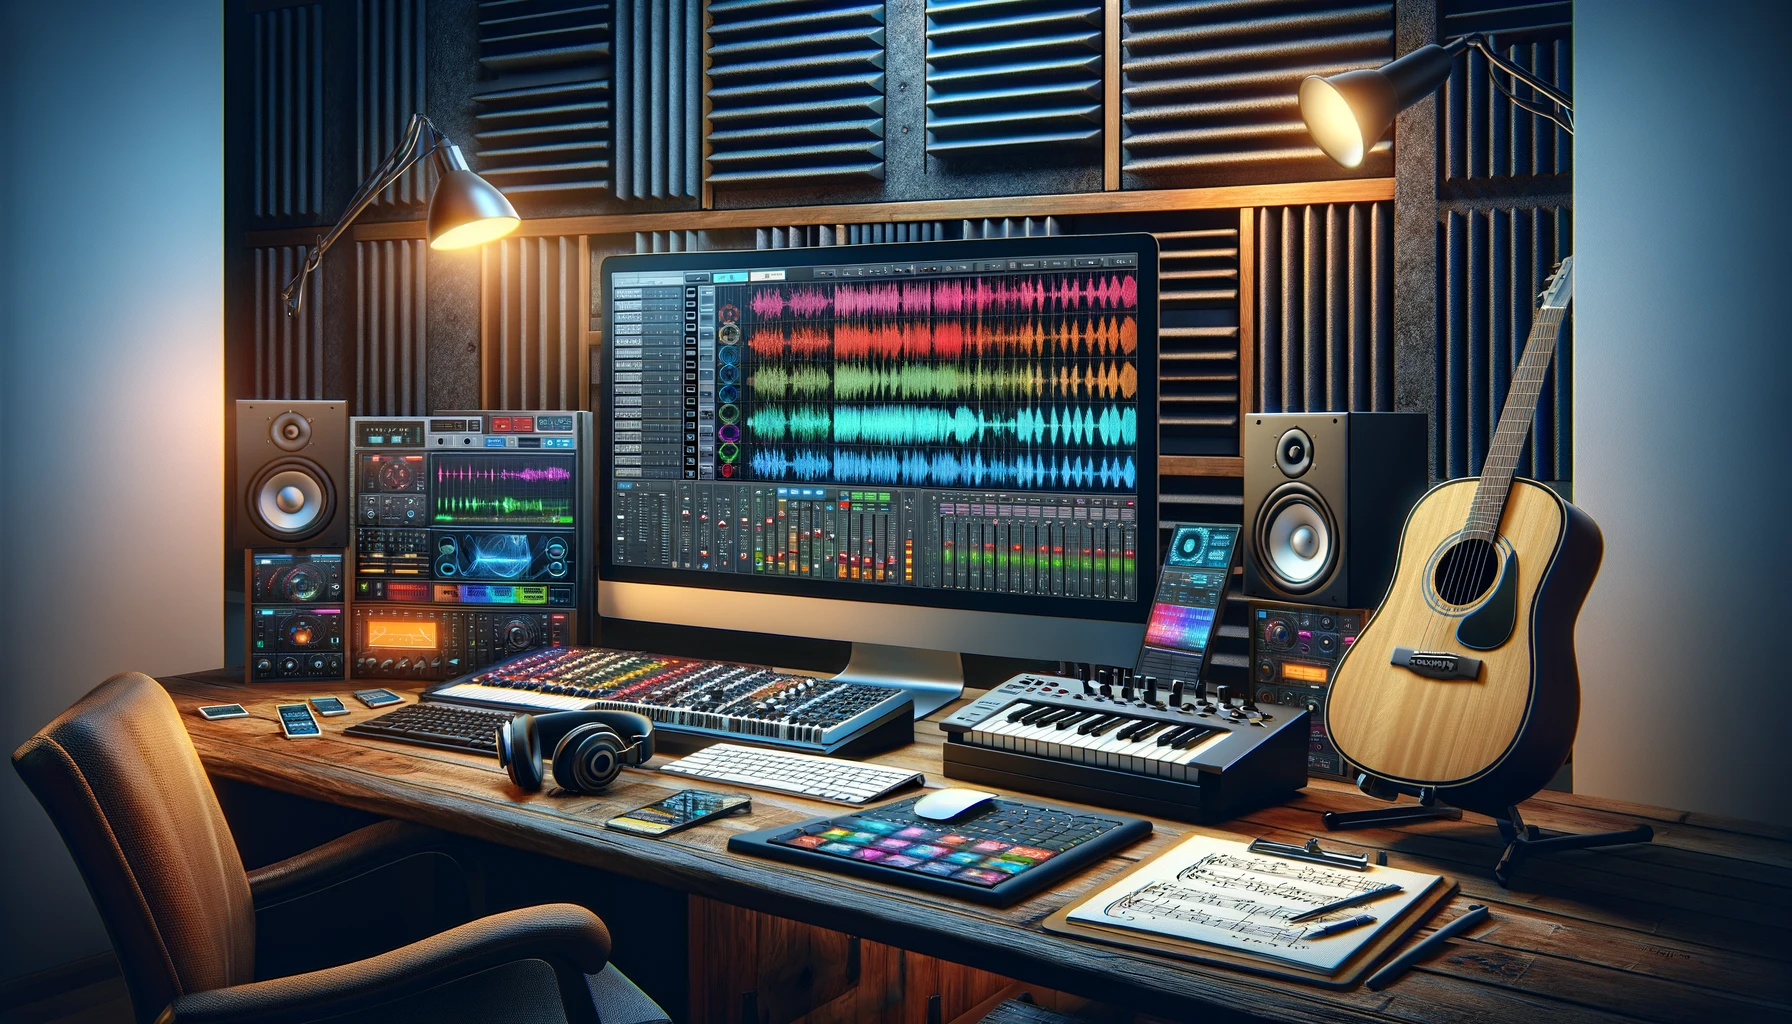 A detailed image of a music production studio, emphasizing the analysis aspect of music production.